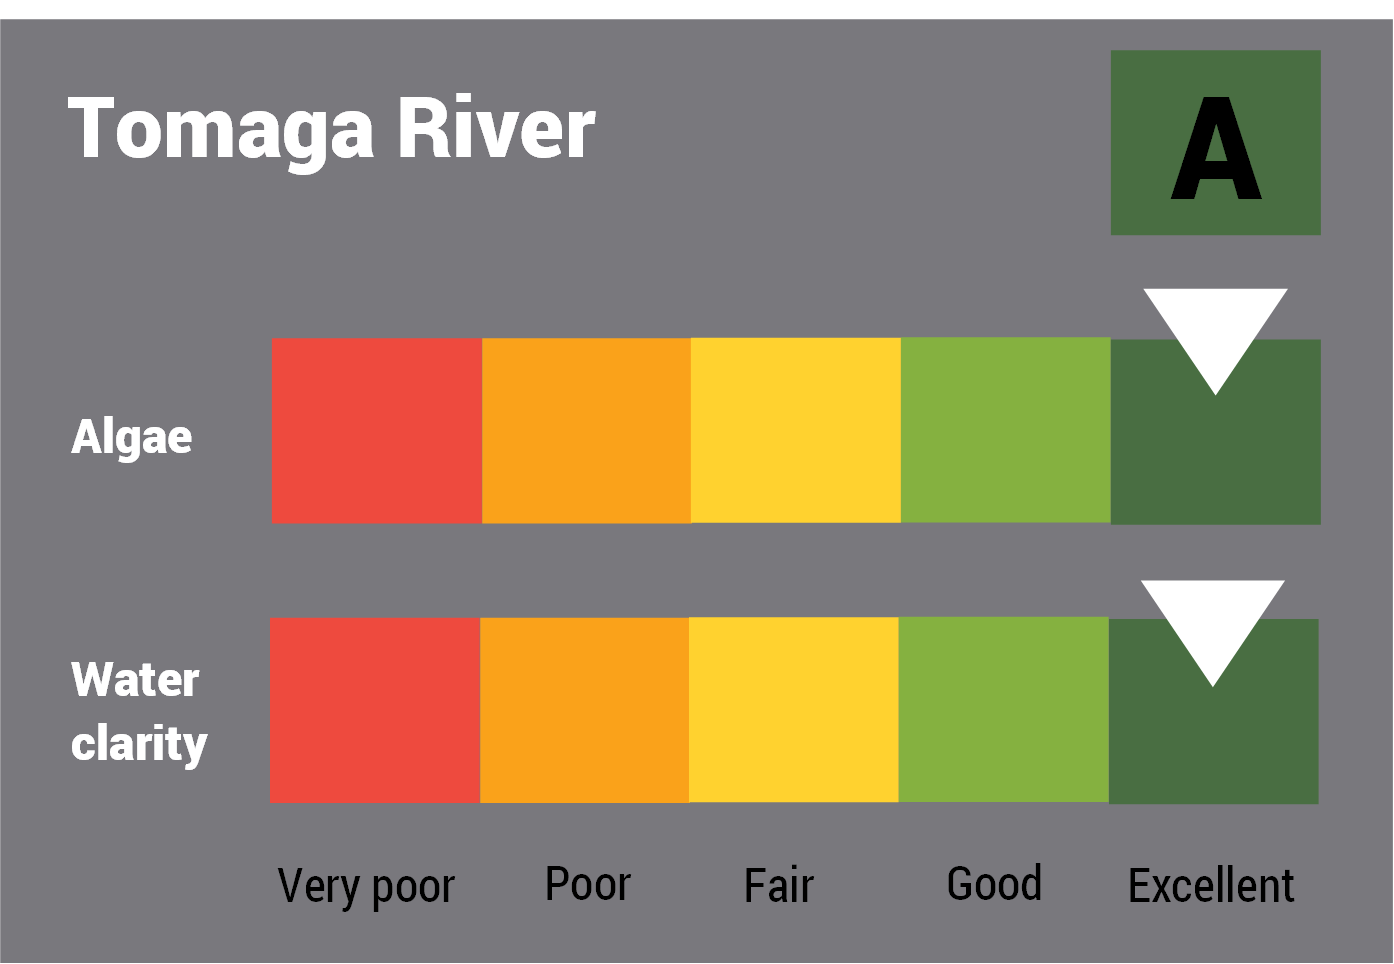 Tomaga River water quality report card for algae and water clarity showing colour-coded ratings (red, orange, yellow, light green and dark green, which represent very poor, poor, fair, good and excellent, respectively). Algae is rated 'excellent' and water clarity is rated 'good' giving an overall rating of 'excellent' or 'A'.